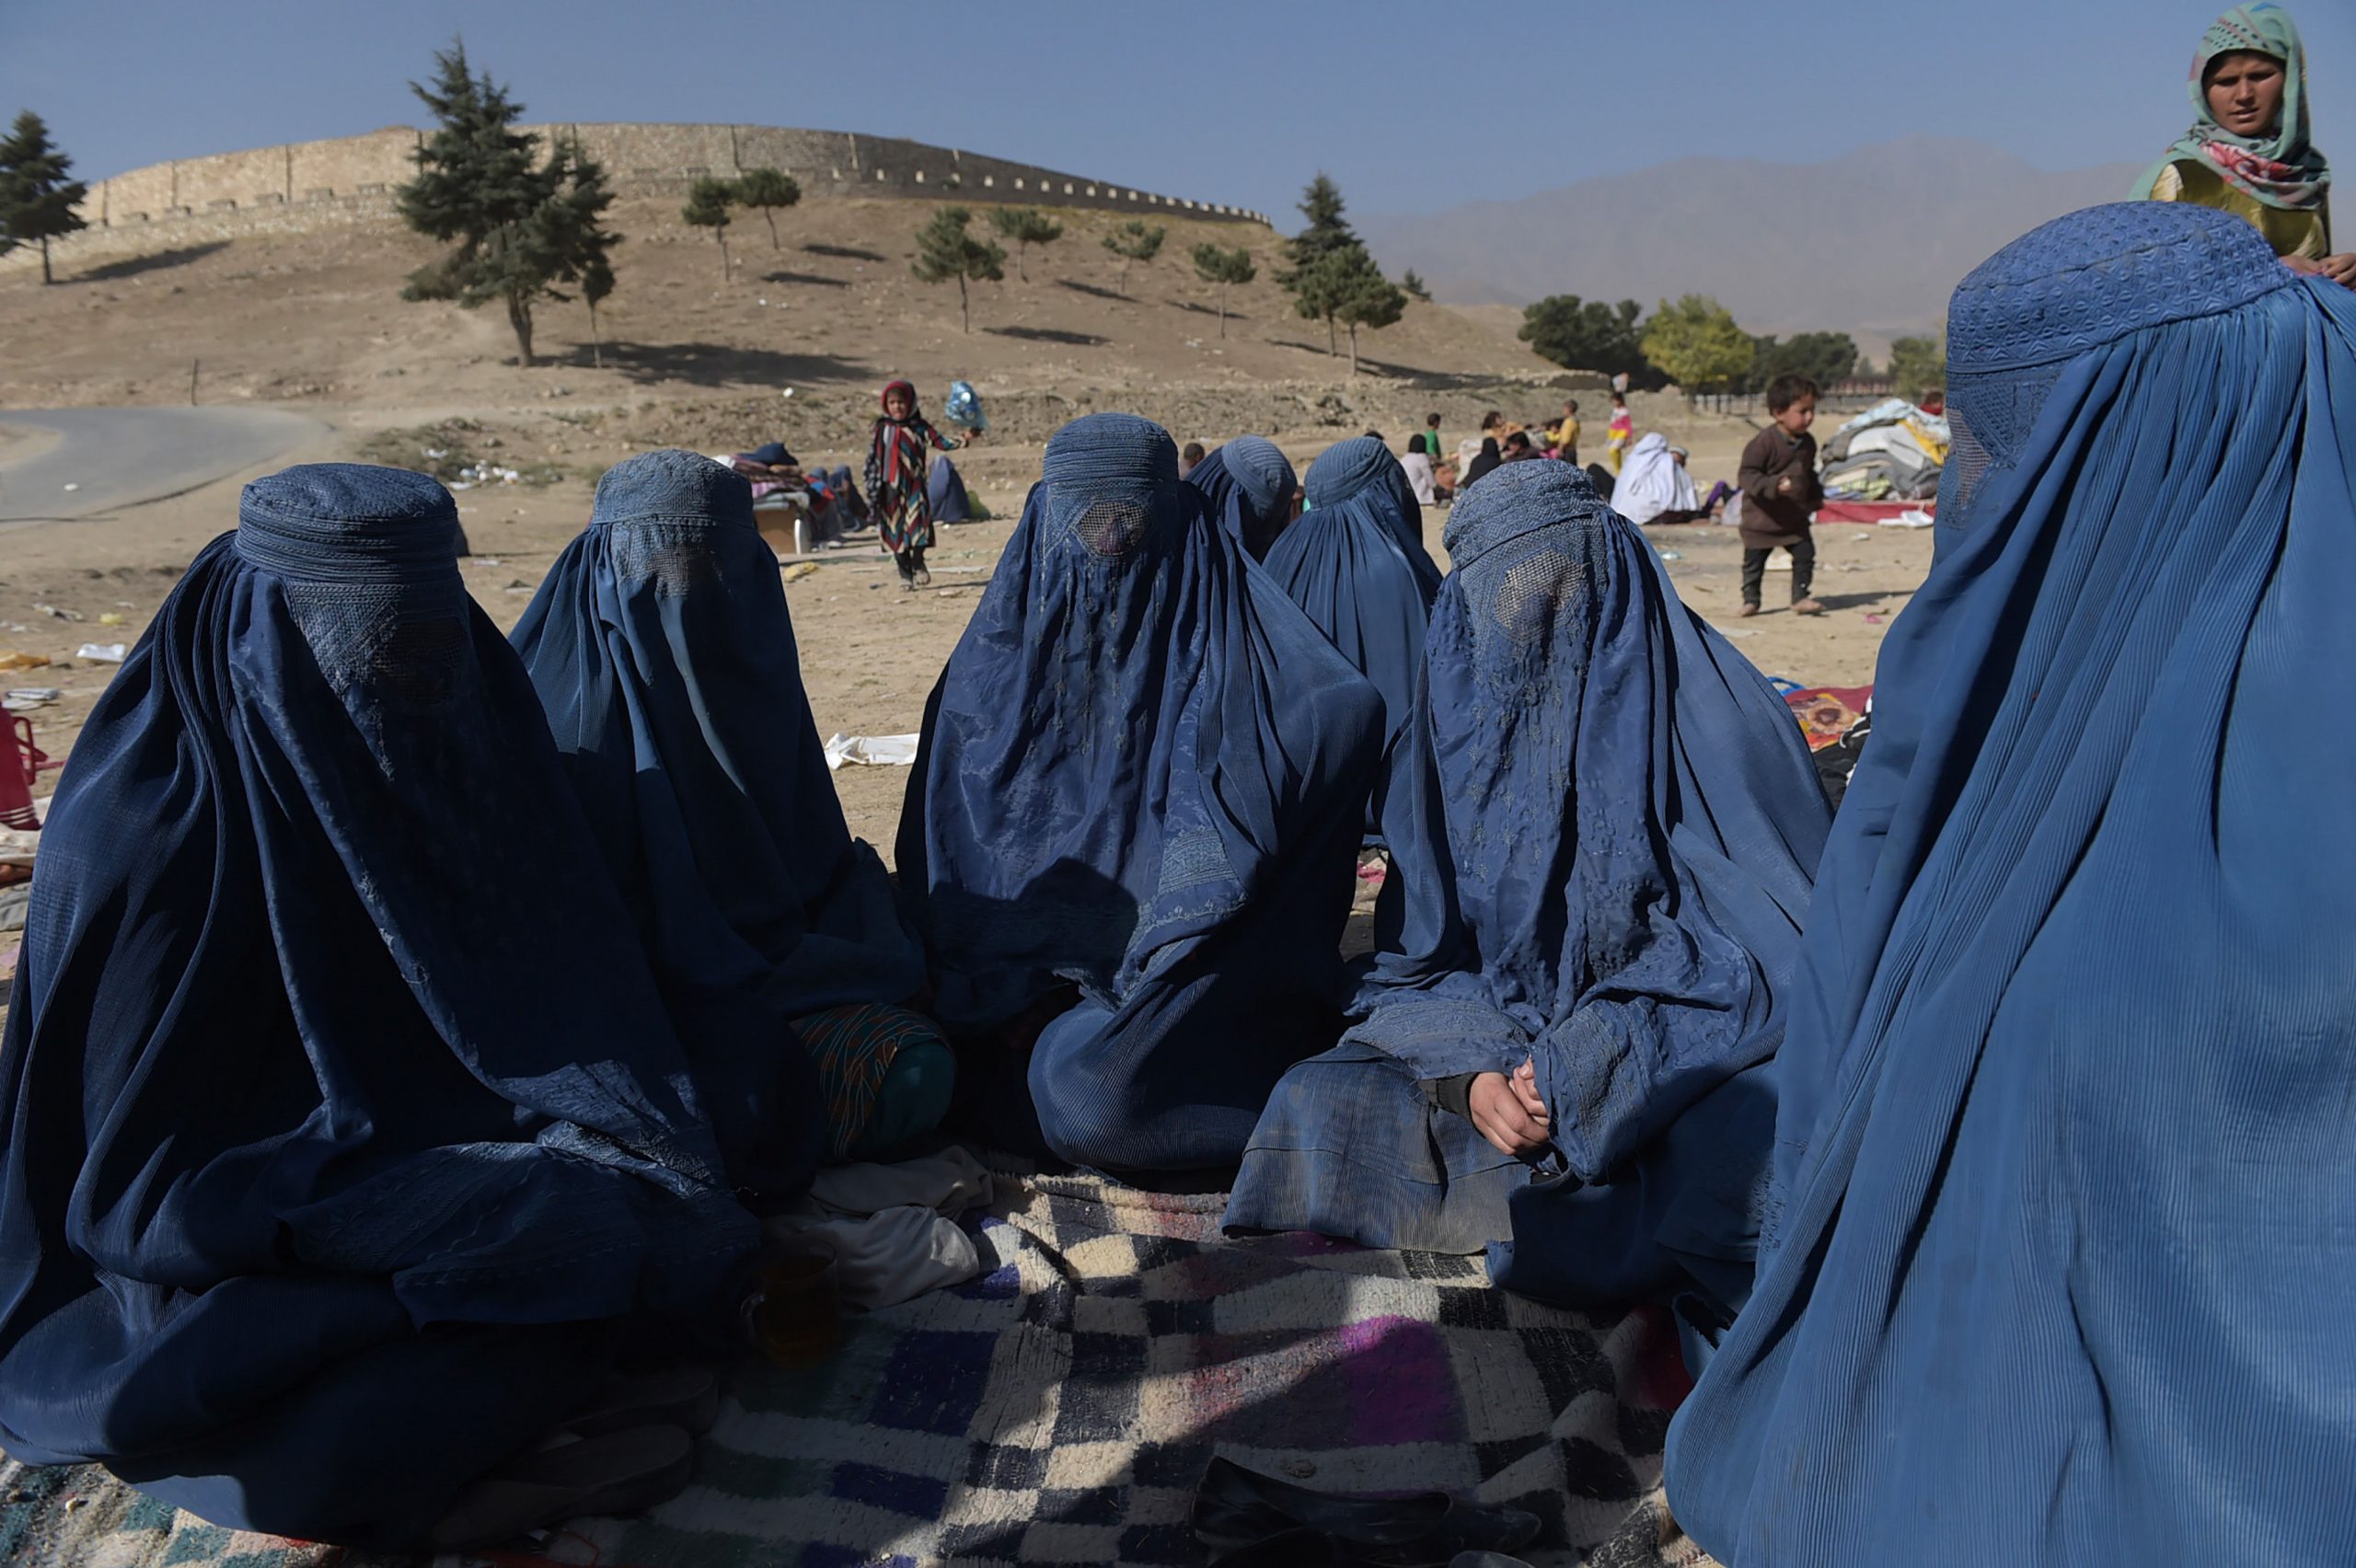 Will Afghans lose civil liberties again? 5 things Taliban banned in the 90s